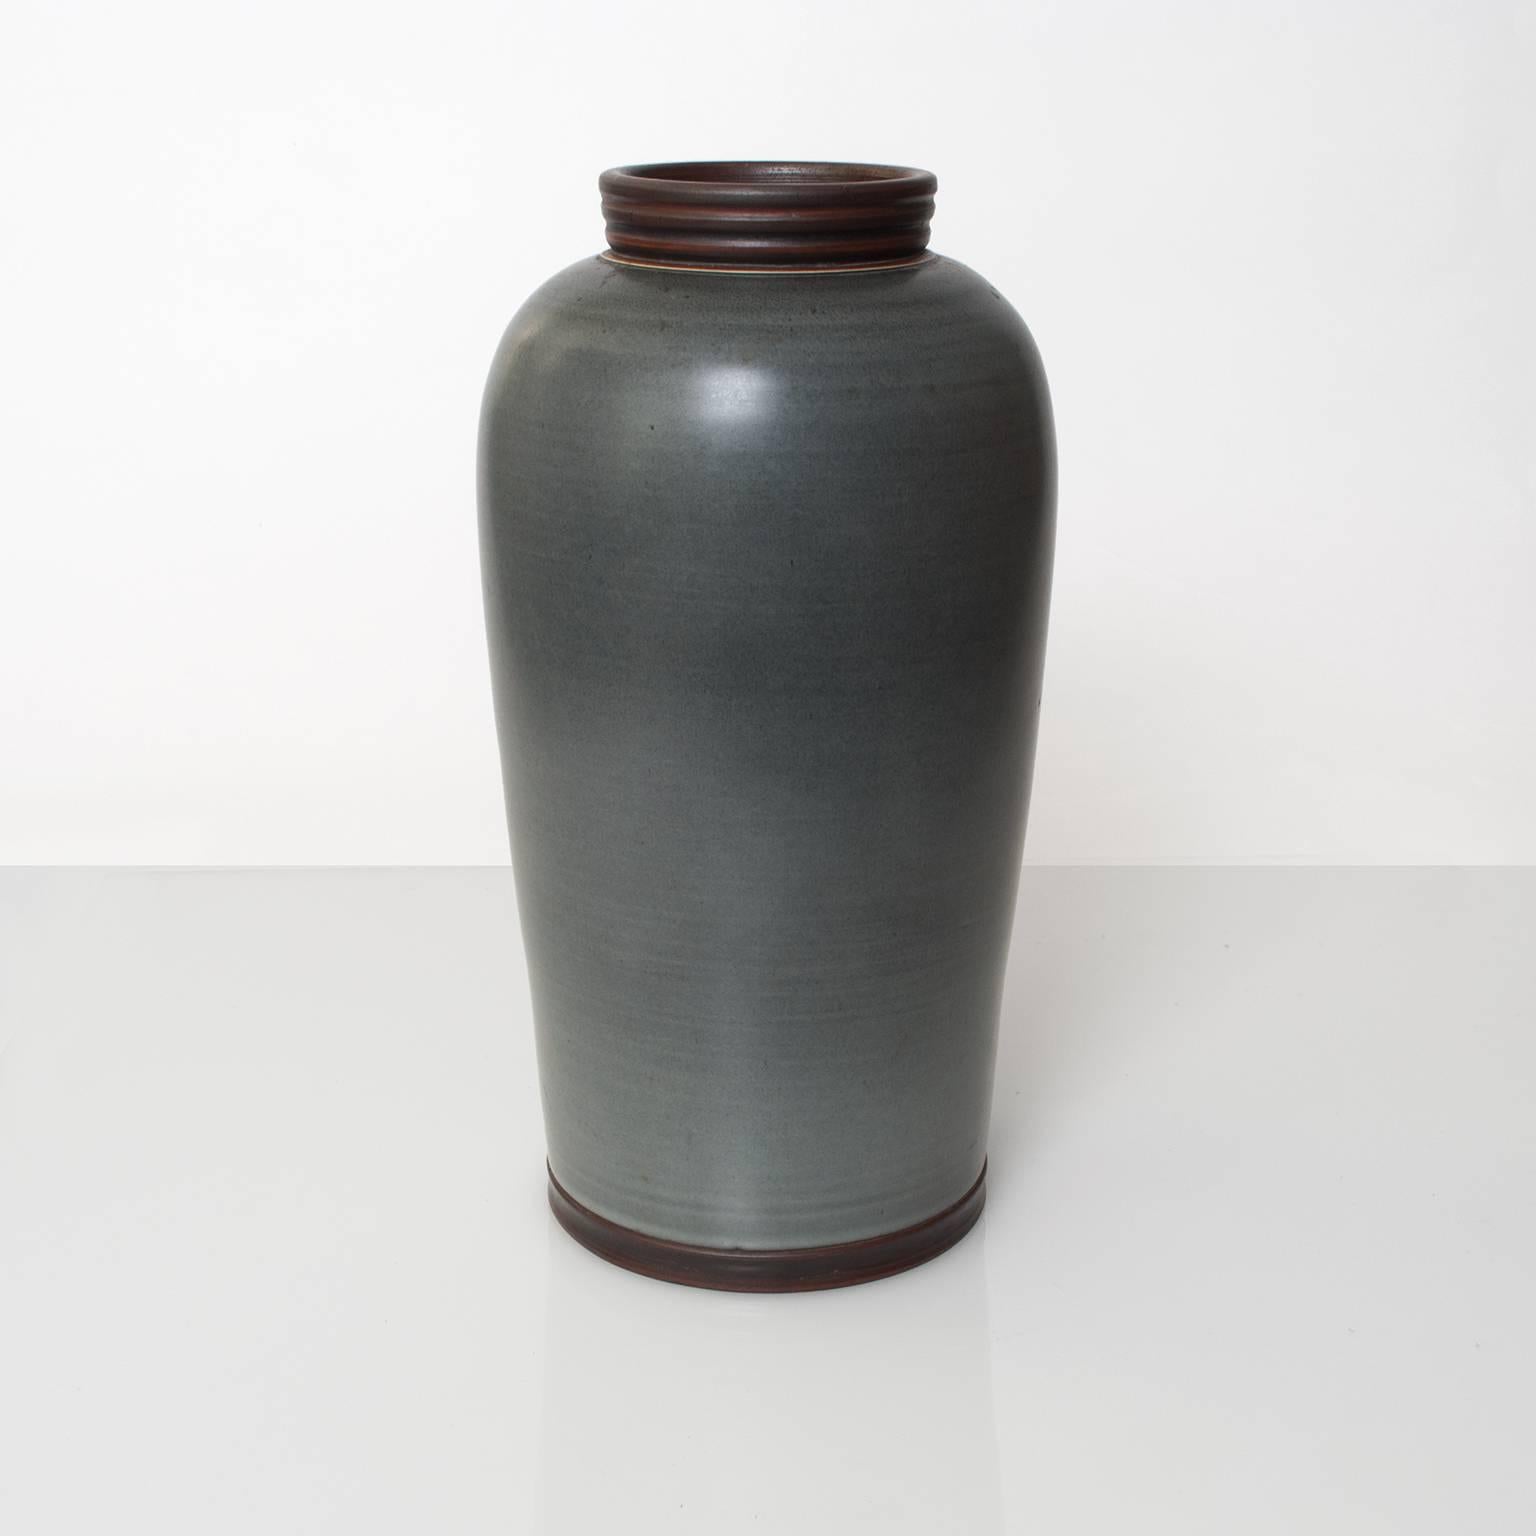 A Swedish art deco, unique studio ceramic vase from artist Gunnar Nylund for ALP, Lidkoping. Finished in a dark gray blue glaze and detailed in a brown glaze with touches of gold. 
Height: 13